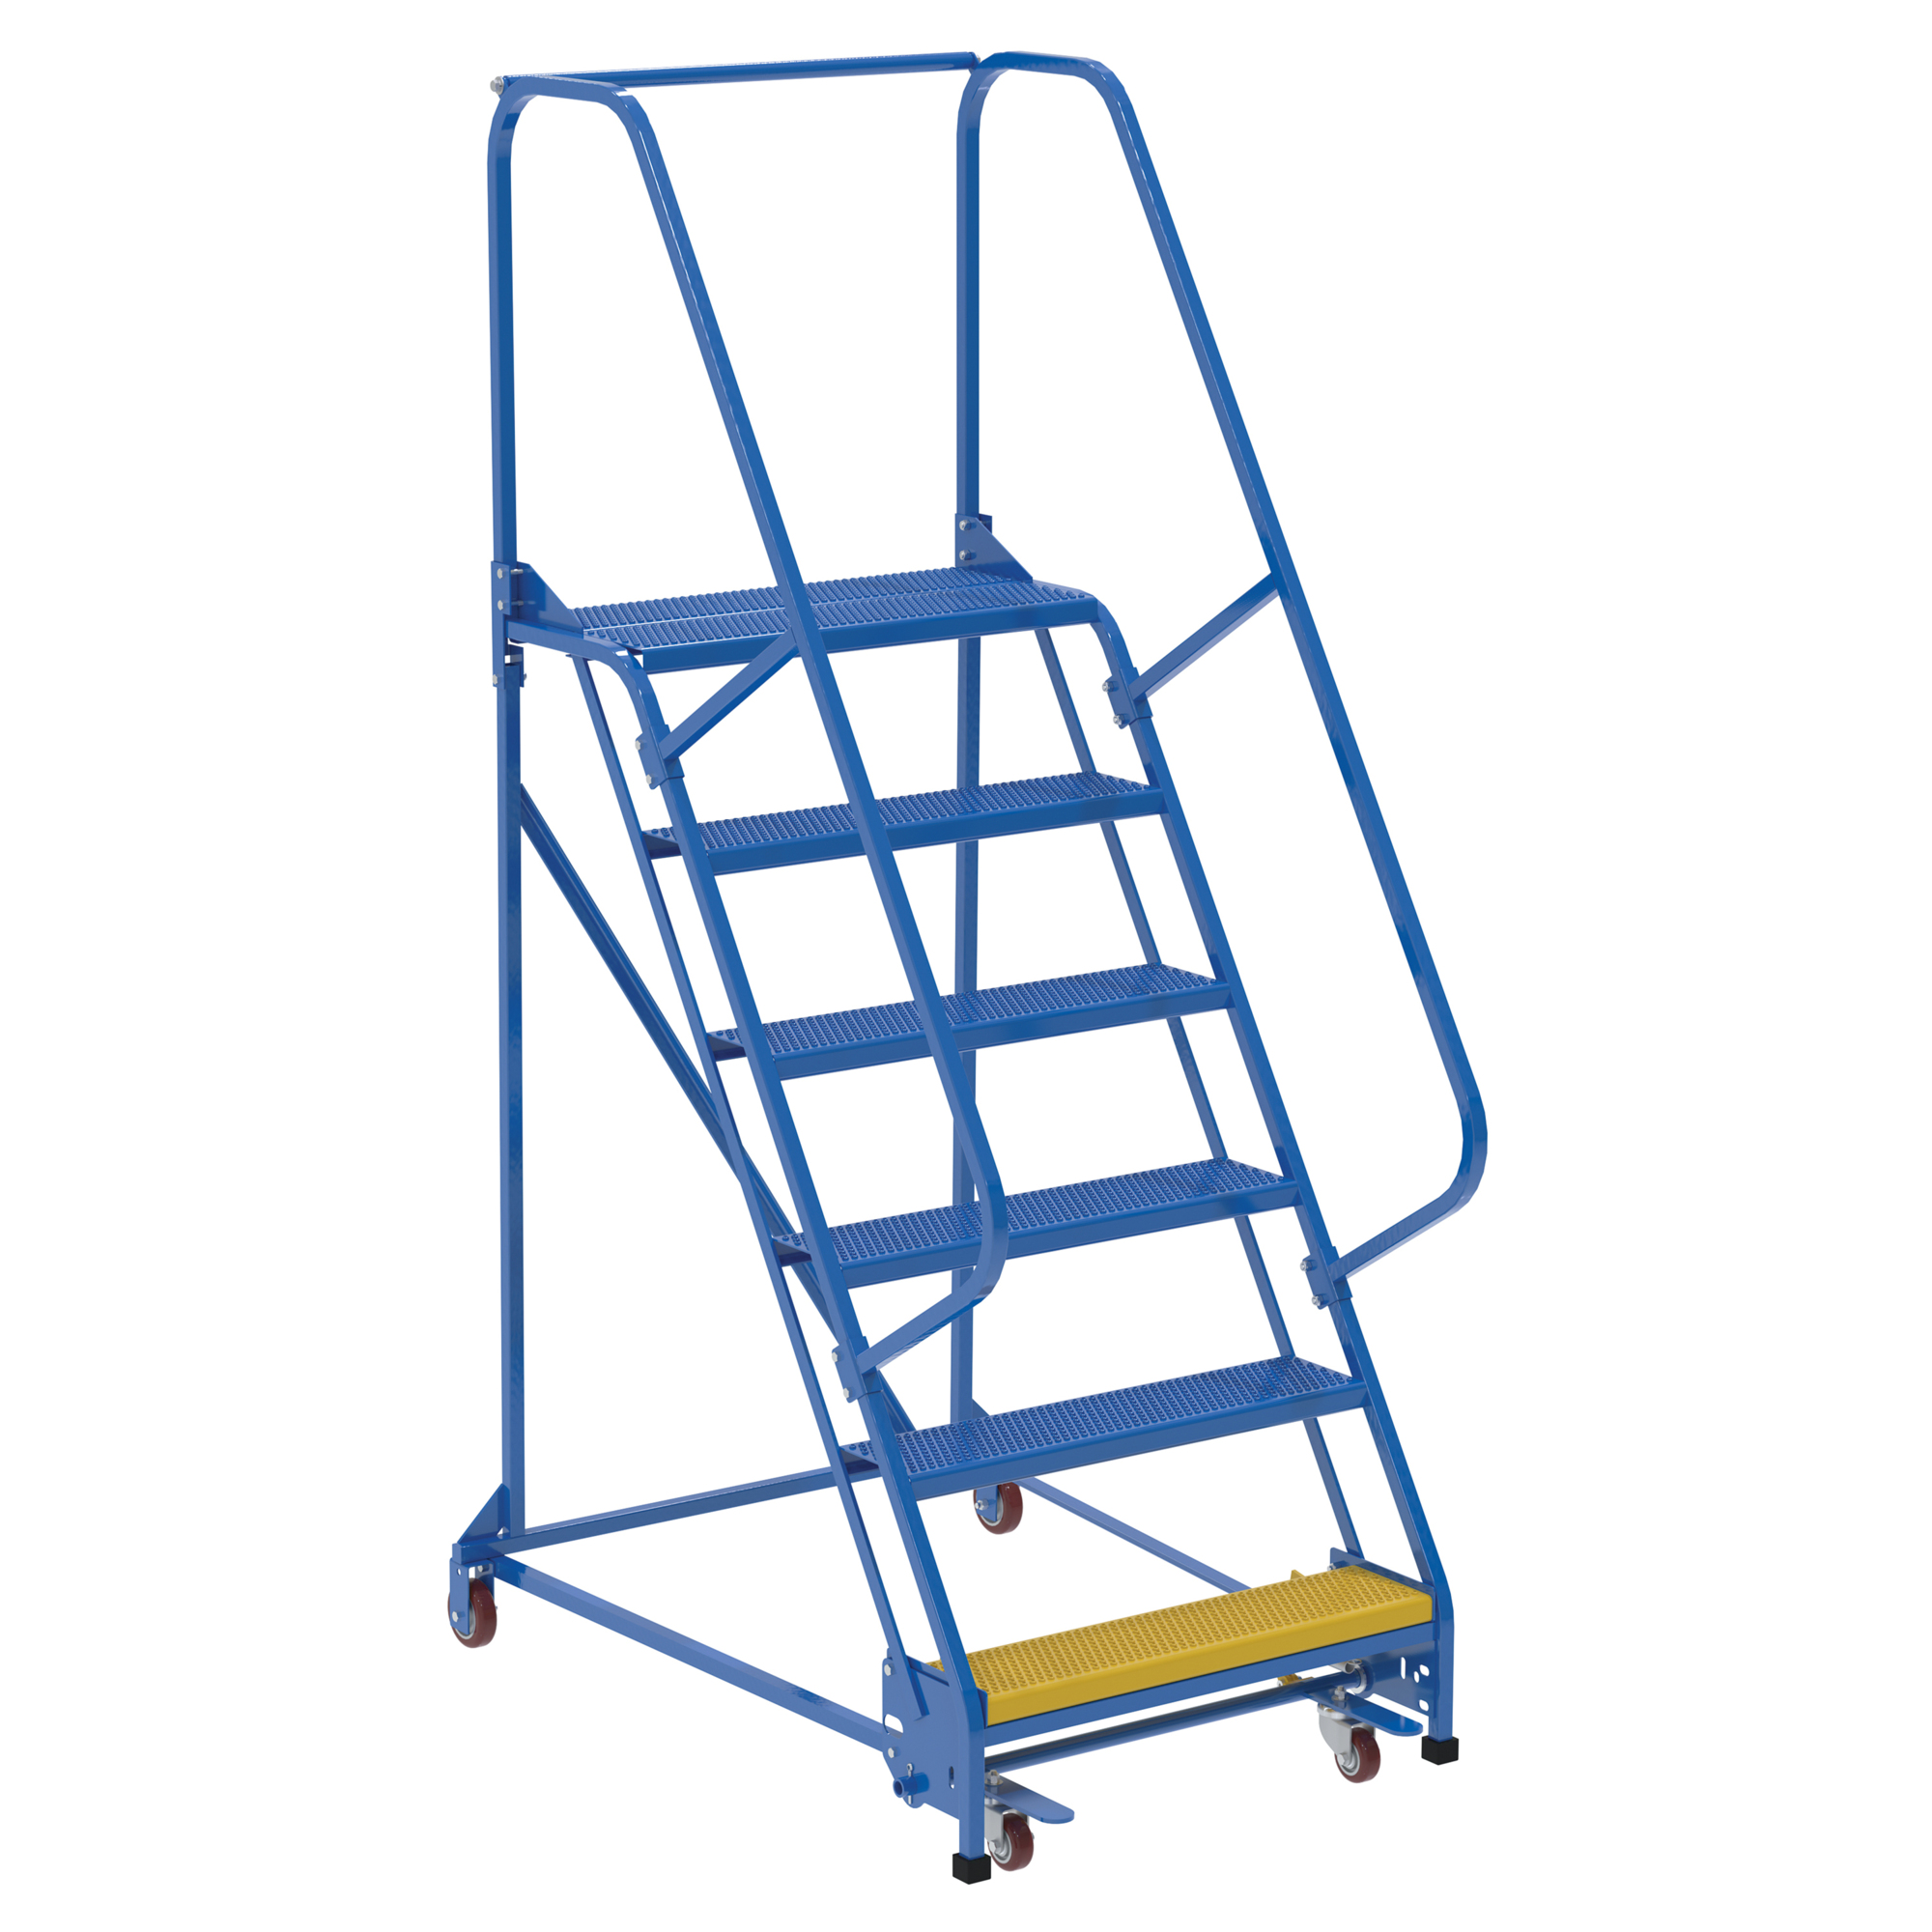 Vestil, 6 Step perforated warehouse ladder, Overall Height 90 in, Steps 6 Material Steel, Model LAD-PW-32-6-P